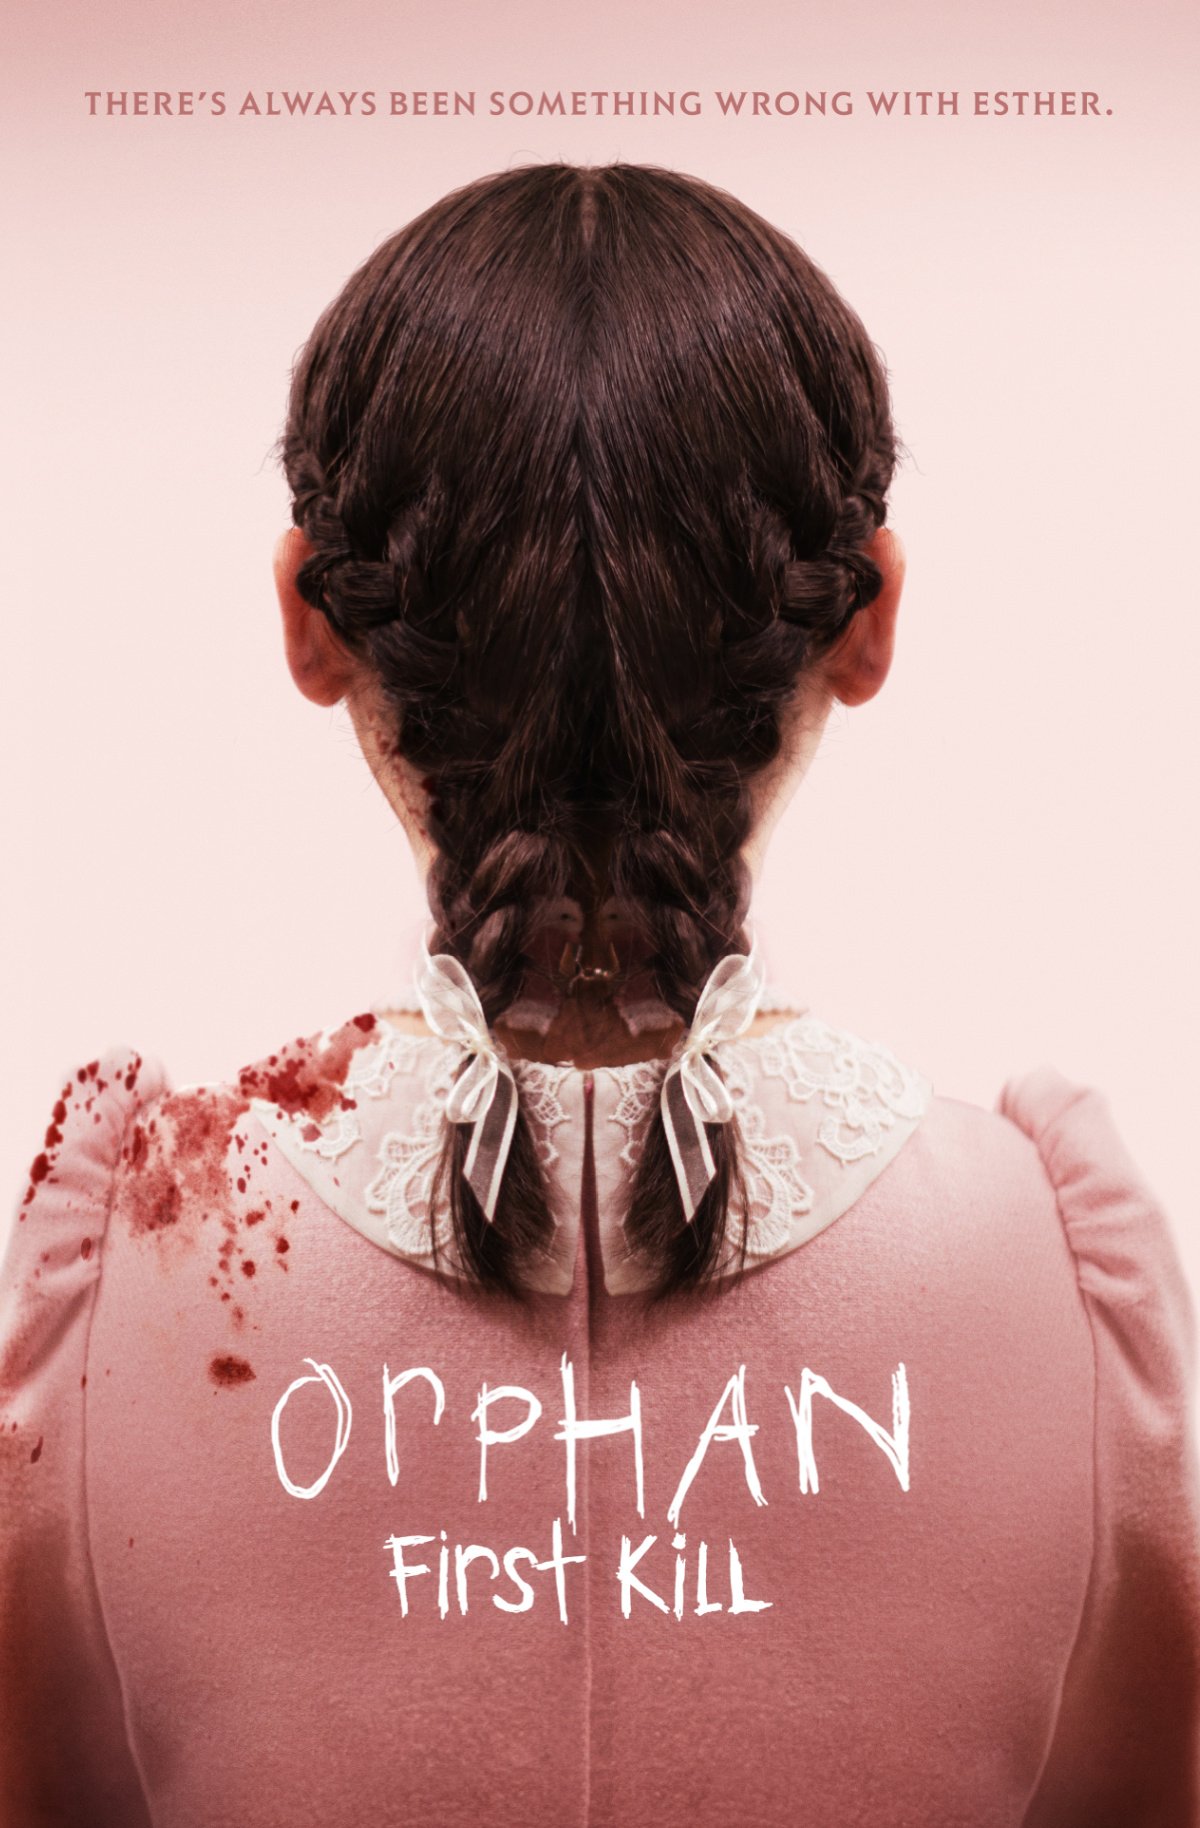 darrell closson recommends Orphan Movie Free Online